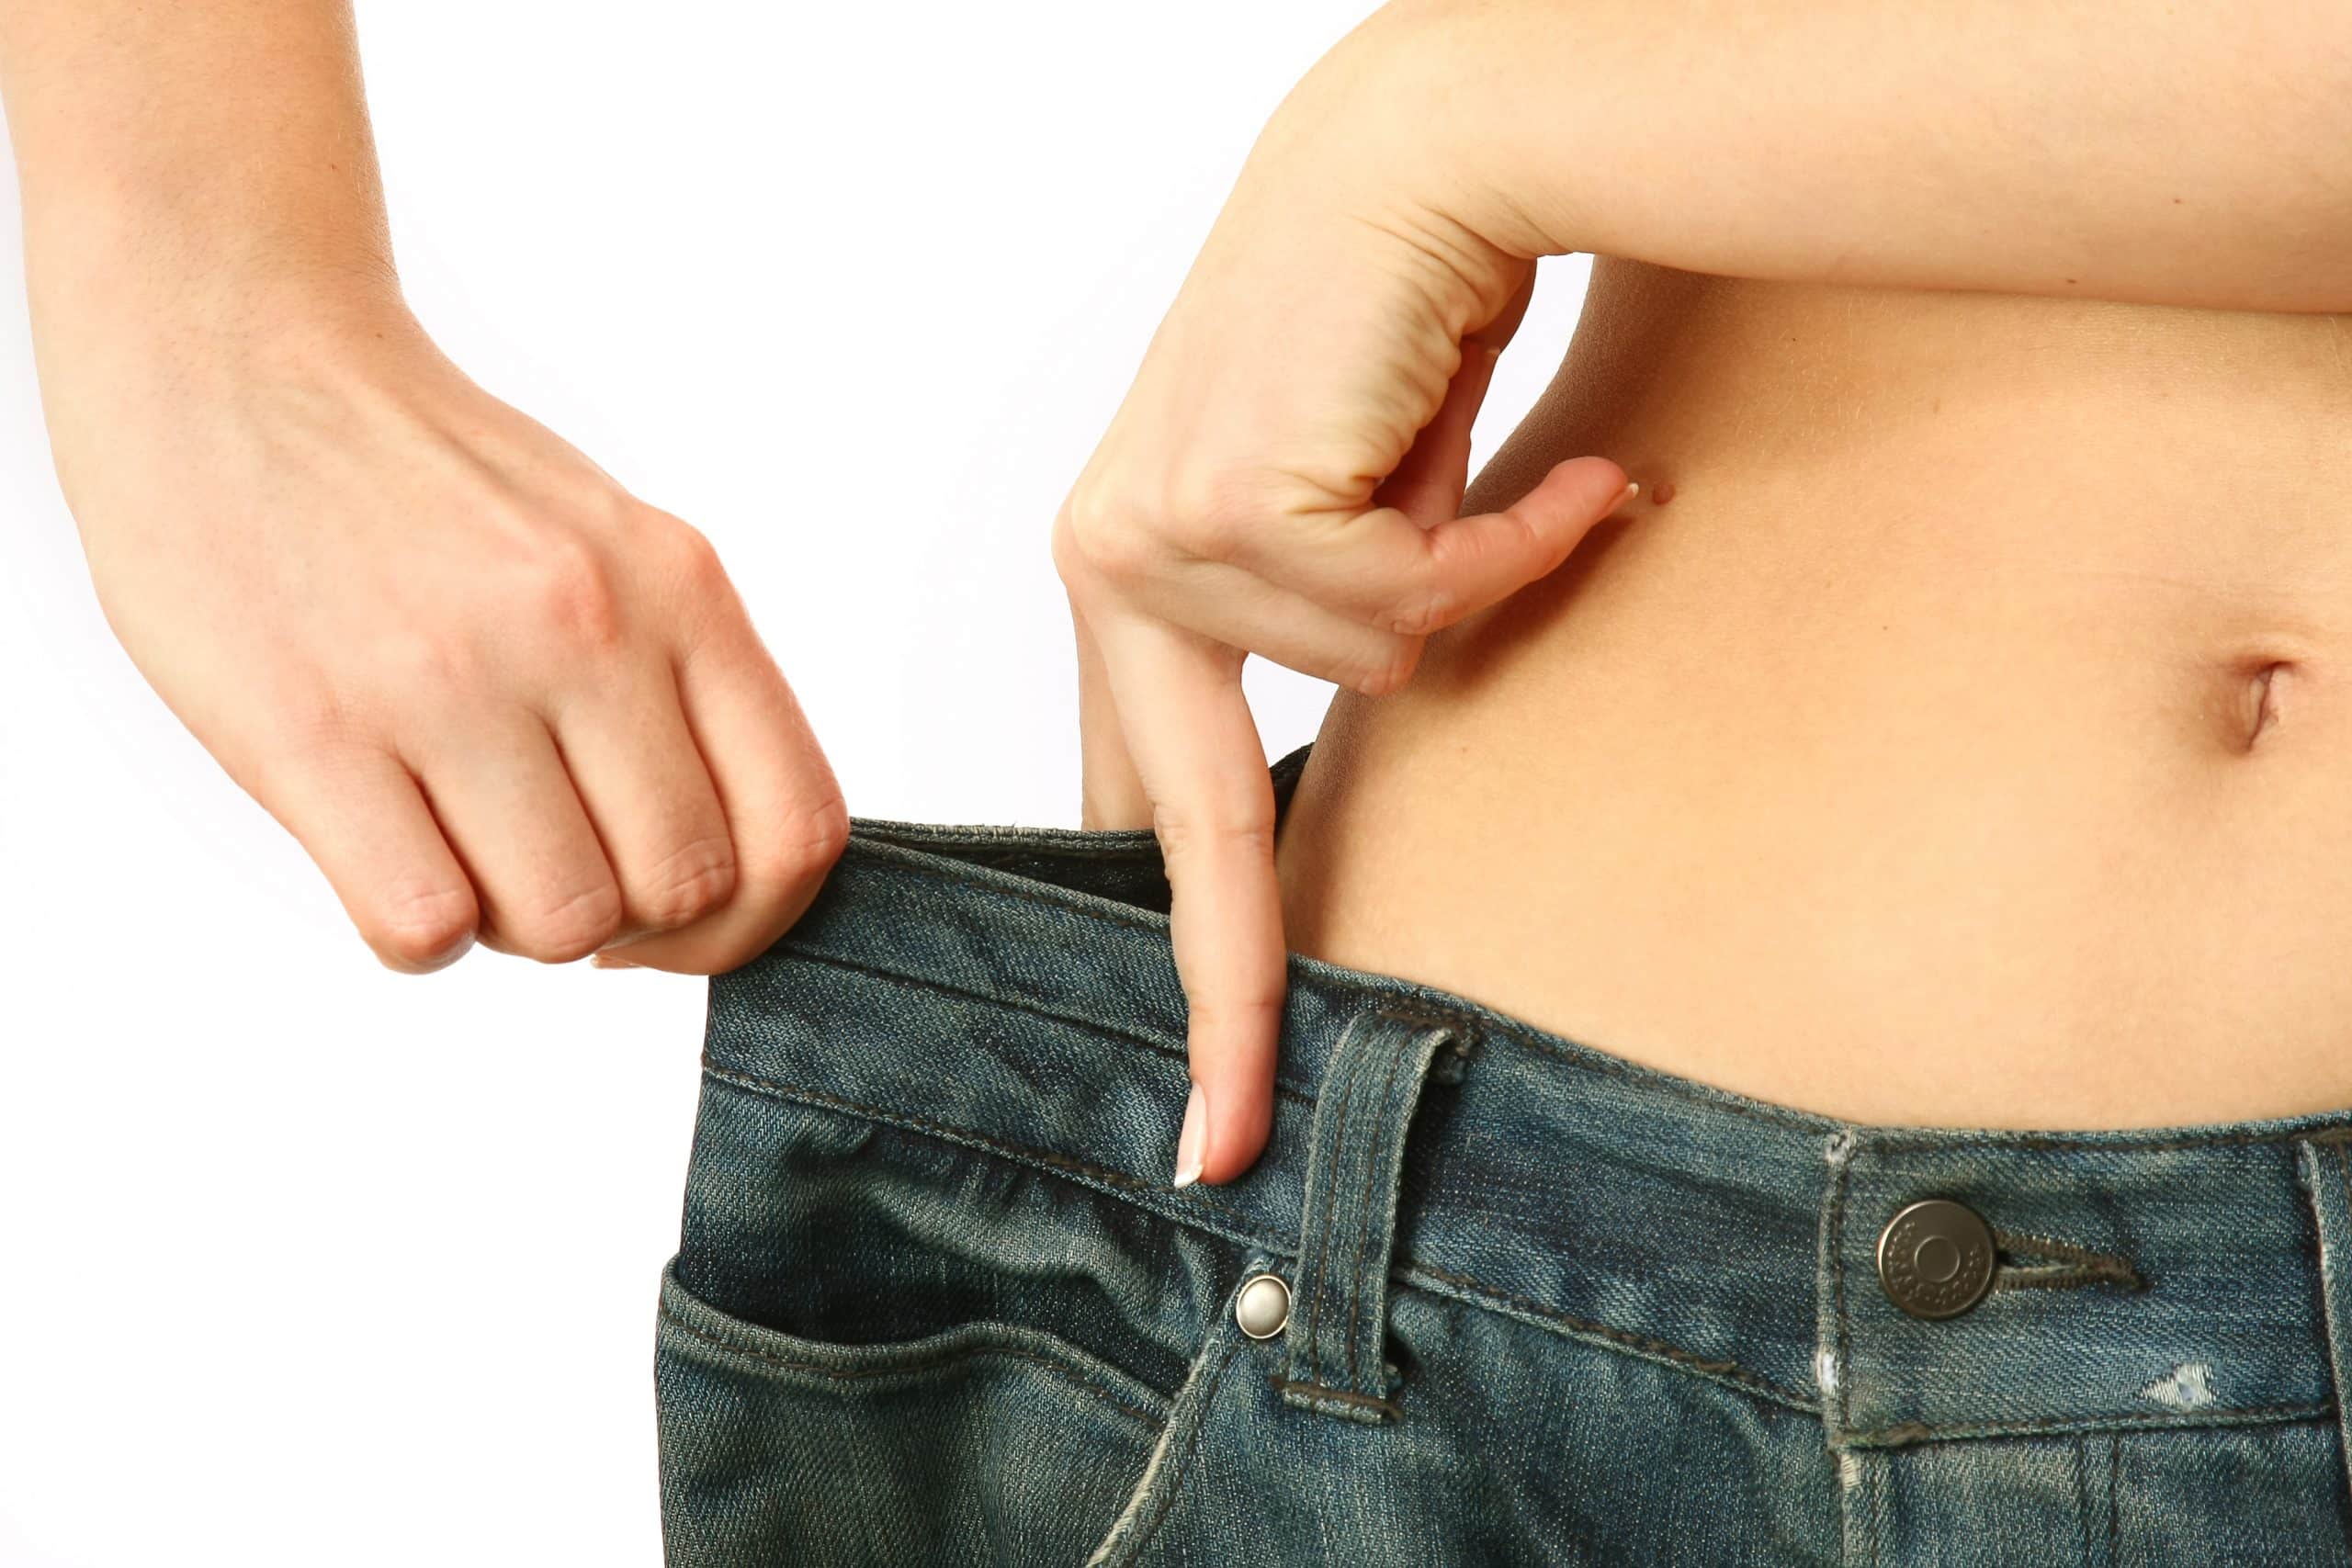 Sagging belly: what causes it and how to eliminate it